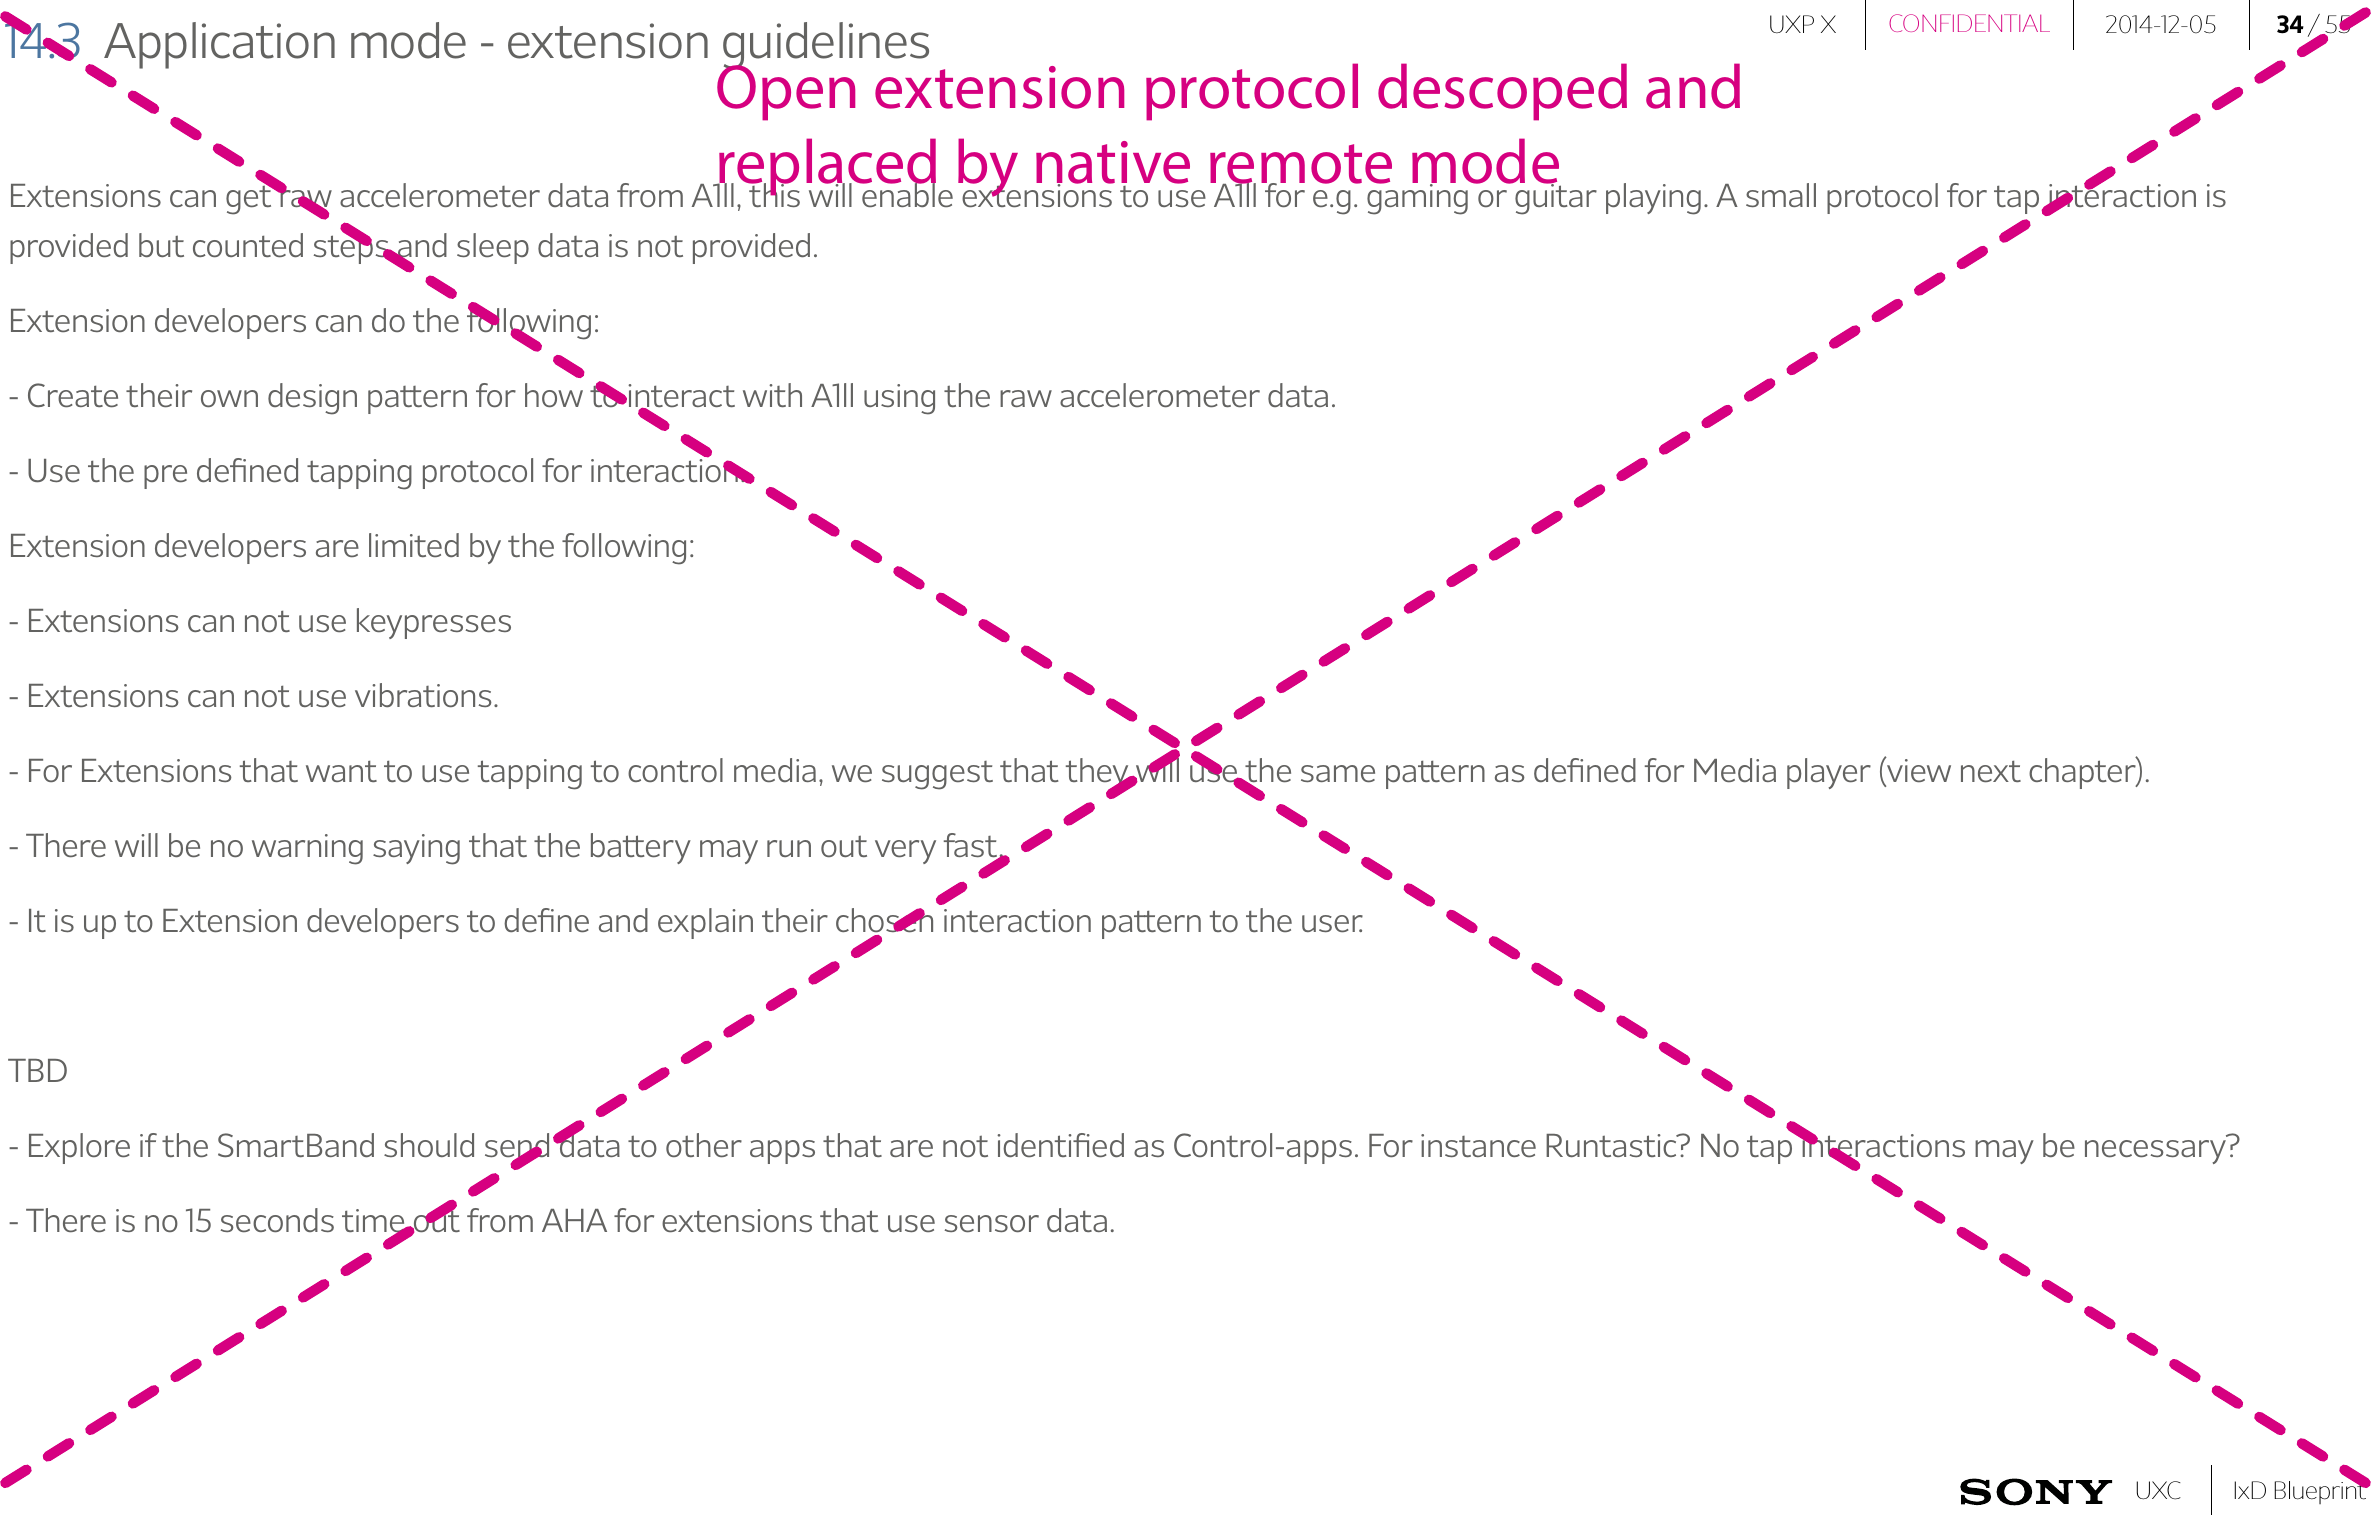 UXP X 2014-12-05 34 / 55IxD BlueprintUXCCONFIDENTIAL14.3  Application mode - extension guidelinesExtensions can get raw accelerometer data from A1ll, this will enable extensions to use A1ll for e.g. gaming or guitar playing. A small protocol for tap interaction is provided but counted steps and sleep data is not provided.Extension developers can do the following: - Create their own design pattern for how to interact with A1ll using the raw accelerometer data. - Use the pre deﬁned tapping protocol for interaction.Extension developers are limited by the following: - Extensions can not use keypresses- Extensions can not use vibrations.- For Extensions that want to use tapping to control media, we suggest that they will use the same pattern as deﬁned for Media player (view next chapter).- There will be no warning saying that the battery may run out very fast. - It is up to Extension developers to deﬁne and explain their chosen interaction pattern to the user.TBD- Explore if the SmartBand should send data to other apps that are not identiﬁed as Control-apps. For instance Runtastic? No tap interactions may be necessary?- There is no 15 seconds time out from AHA for extensions that use sensor data.Open extension protocol descoped and replaced by native remote mode